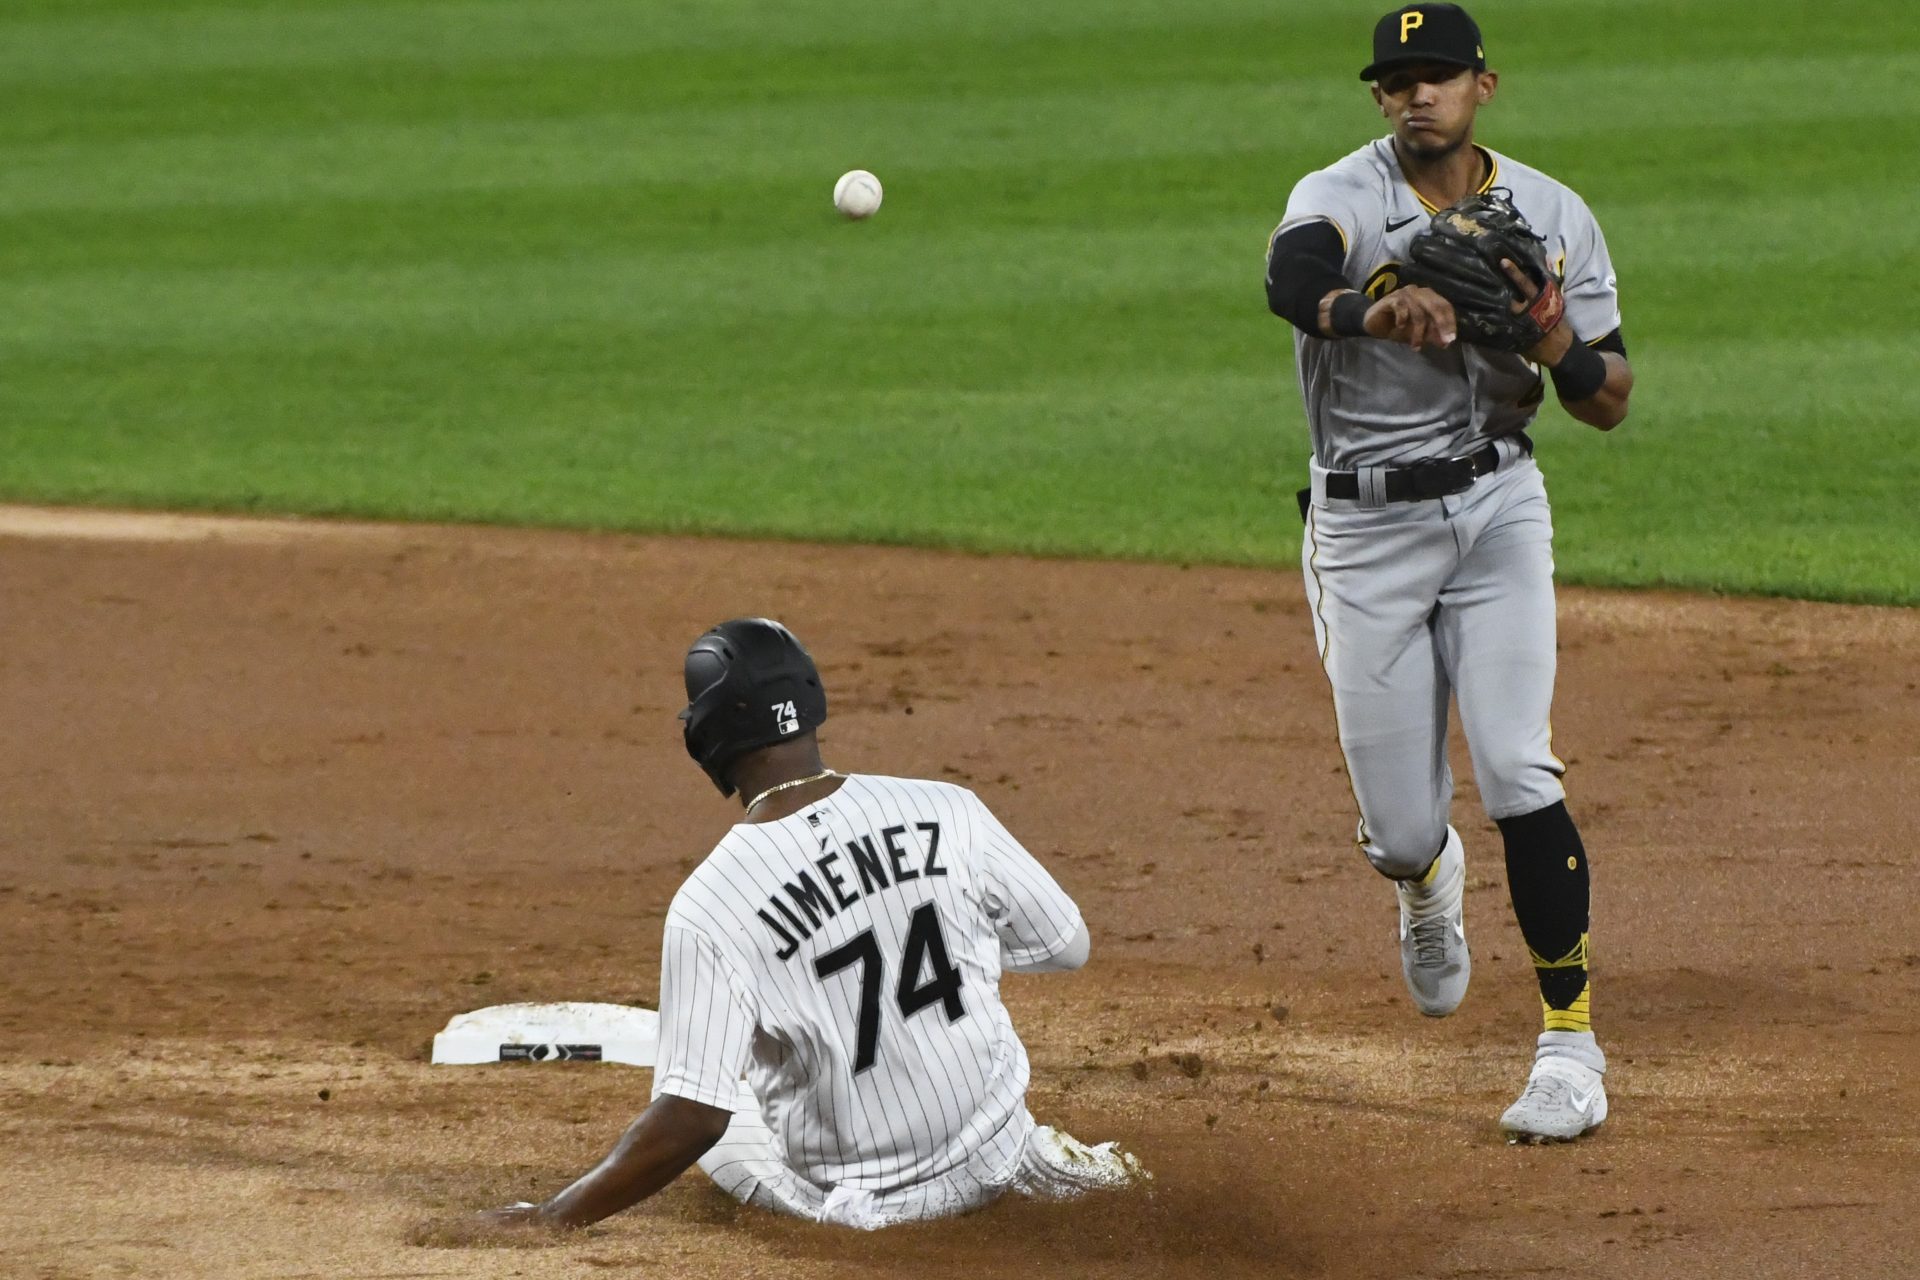 Pittsburgh Pirates second baseman Erik Gonzalez (2) completes a double play after forcing Chicago White Sox left fielder Eloy Jimenez (74) out during the second inning of a baseball game, Tuesday, Aug. 25, 2020, in Chicago.